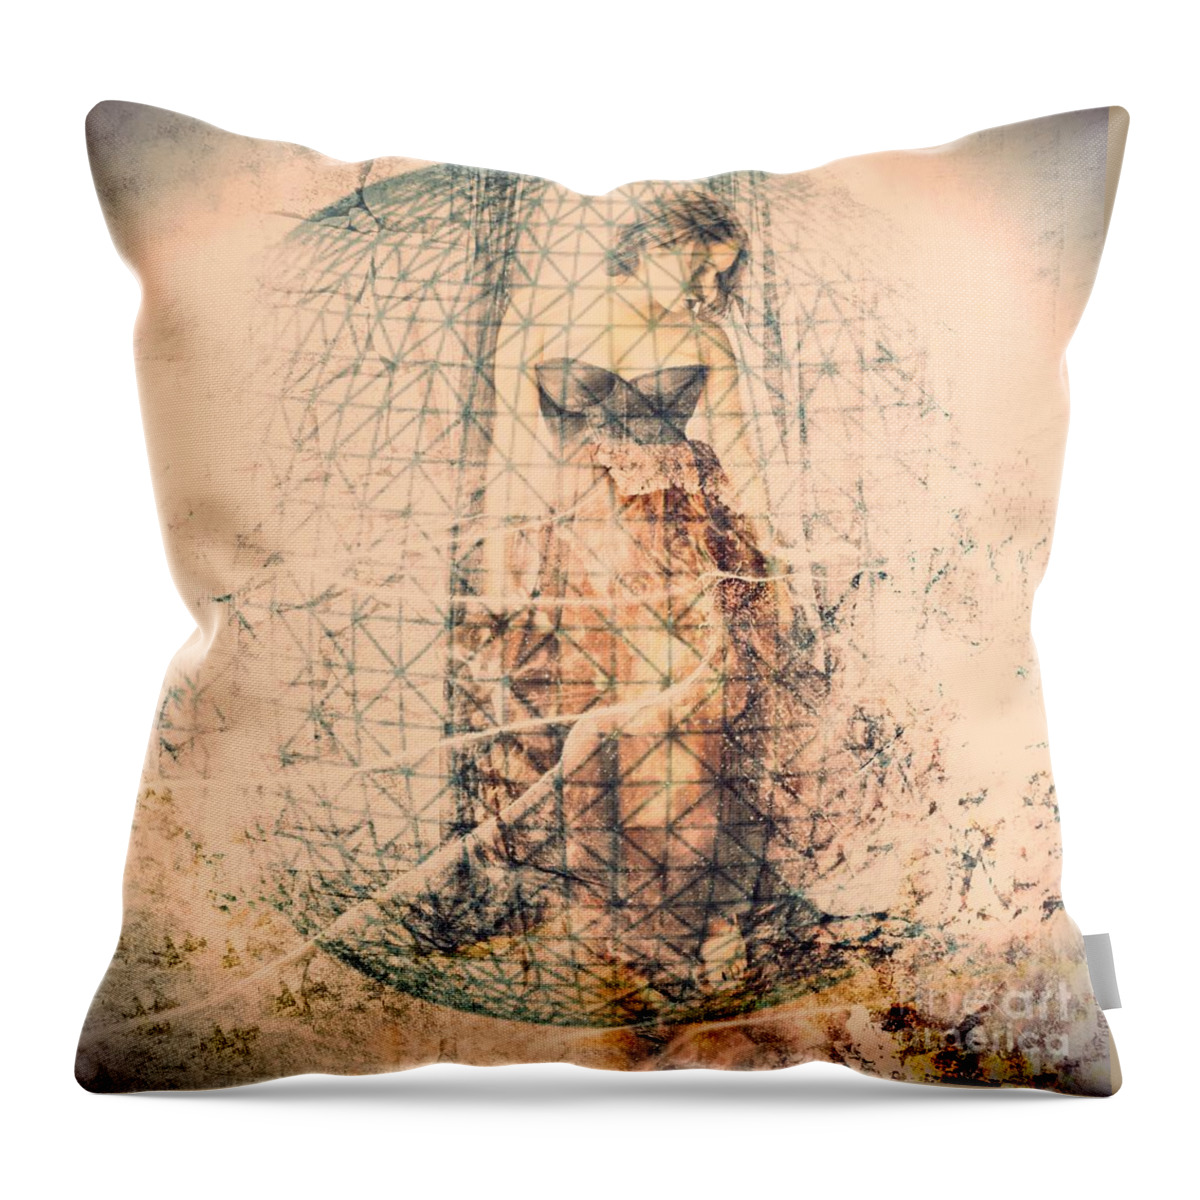  Throw Pillow featuring the photograph Break Away by Jessica S